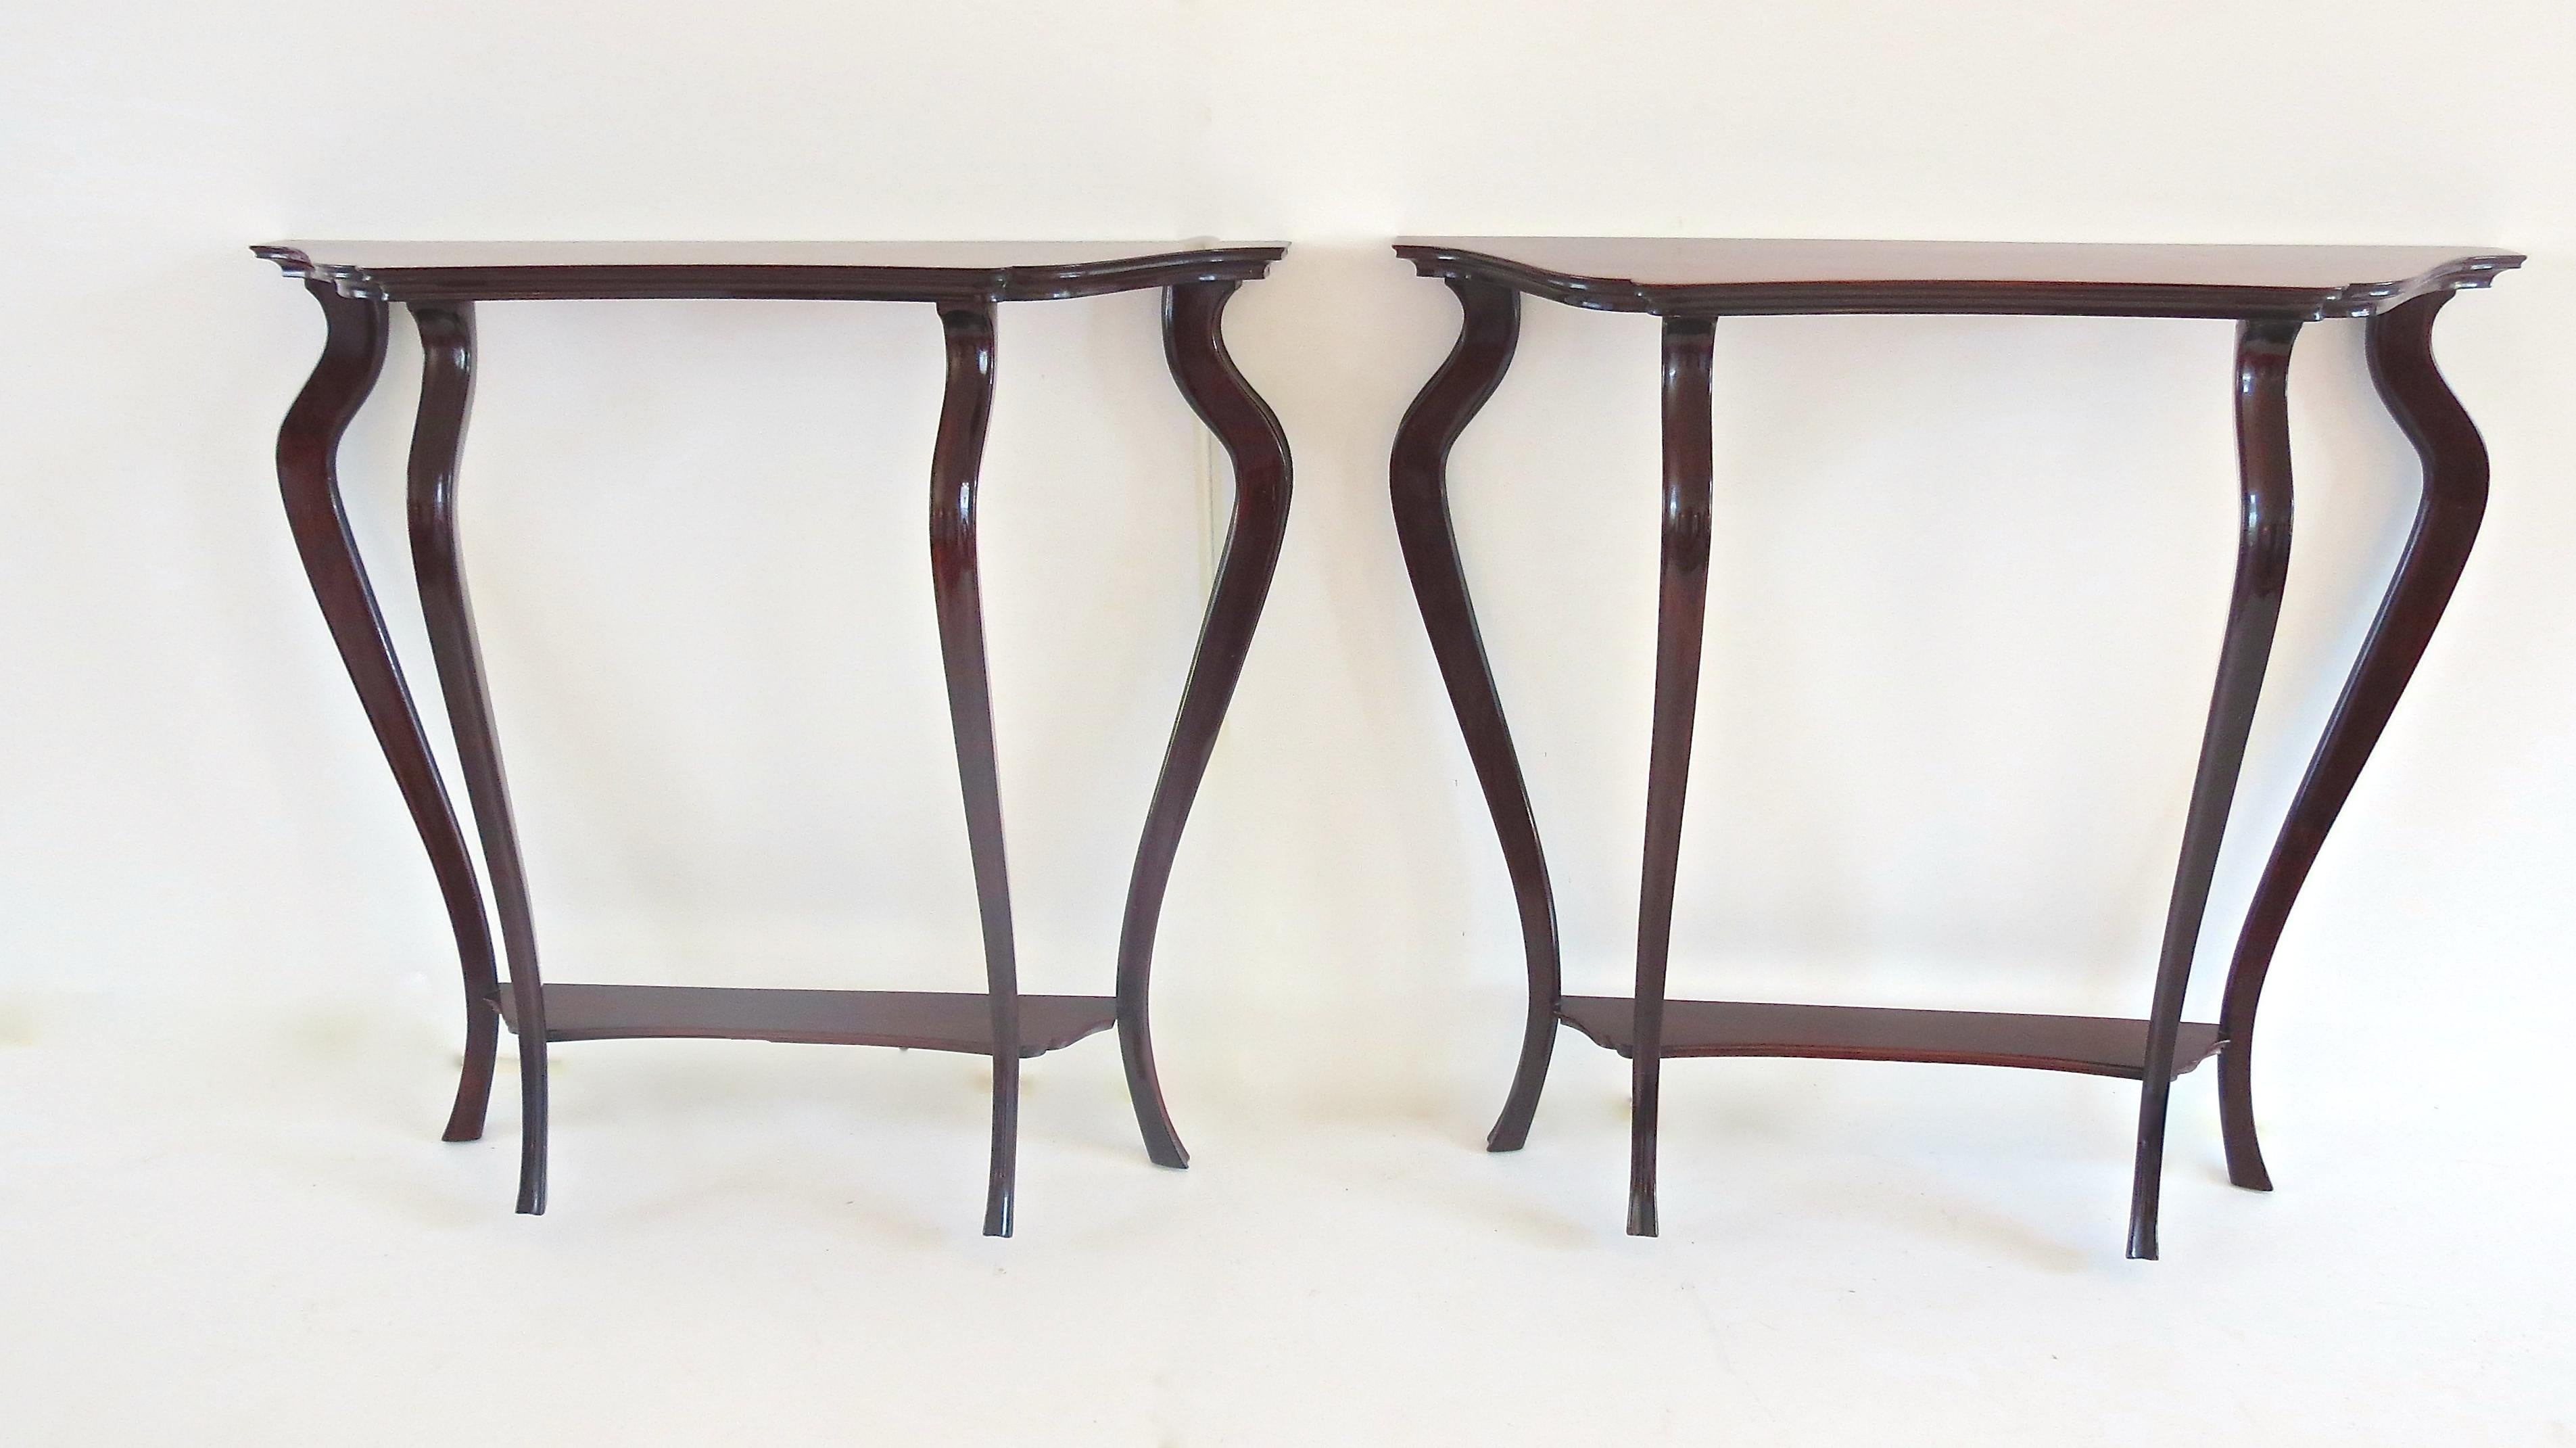 Pair of italian curved console produced by Arch. Maurizio Tempestini, 1940-50
produced for a private residence in Florence
elegant engraved saber legs; two shelves each console
unique example
walnut
very good original patina
very good